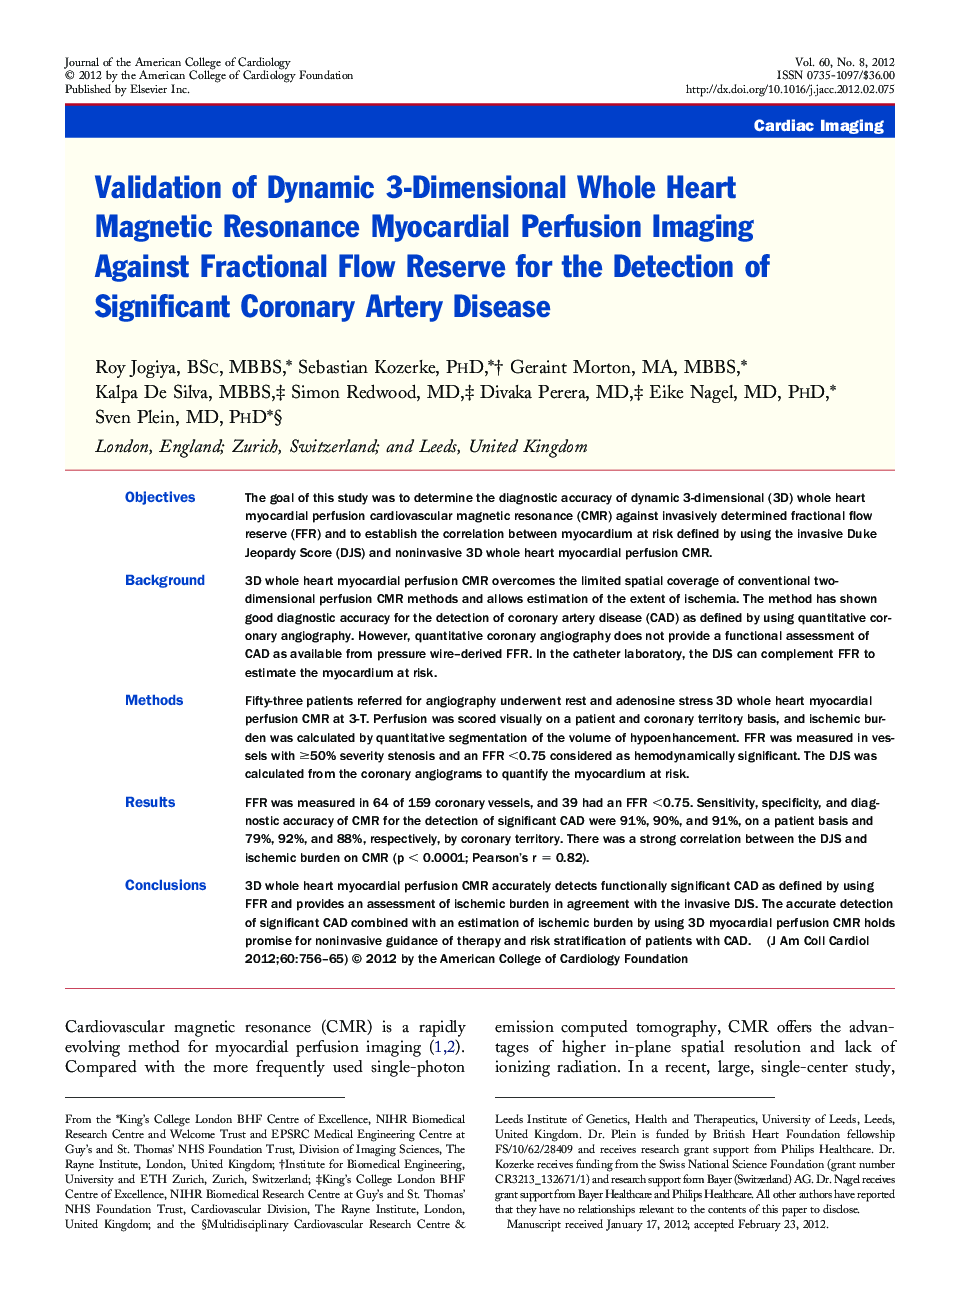 Validation of Dynamic 3-Dimensional Whole Heart Magnetic Resonance Myocardial Perfusion Imaging Against Fractional Flow Reserve for the Detection of Significant Coronary Artery Disease 